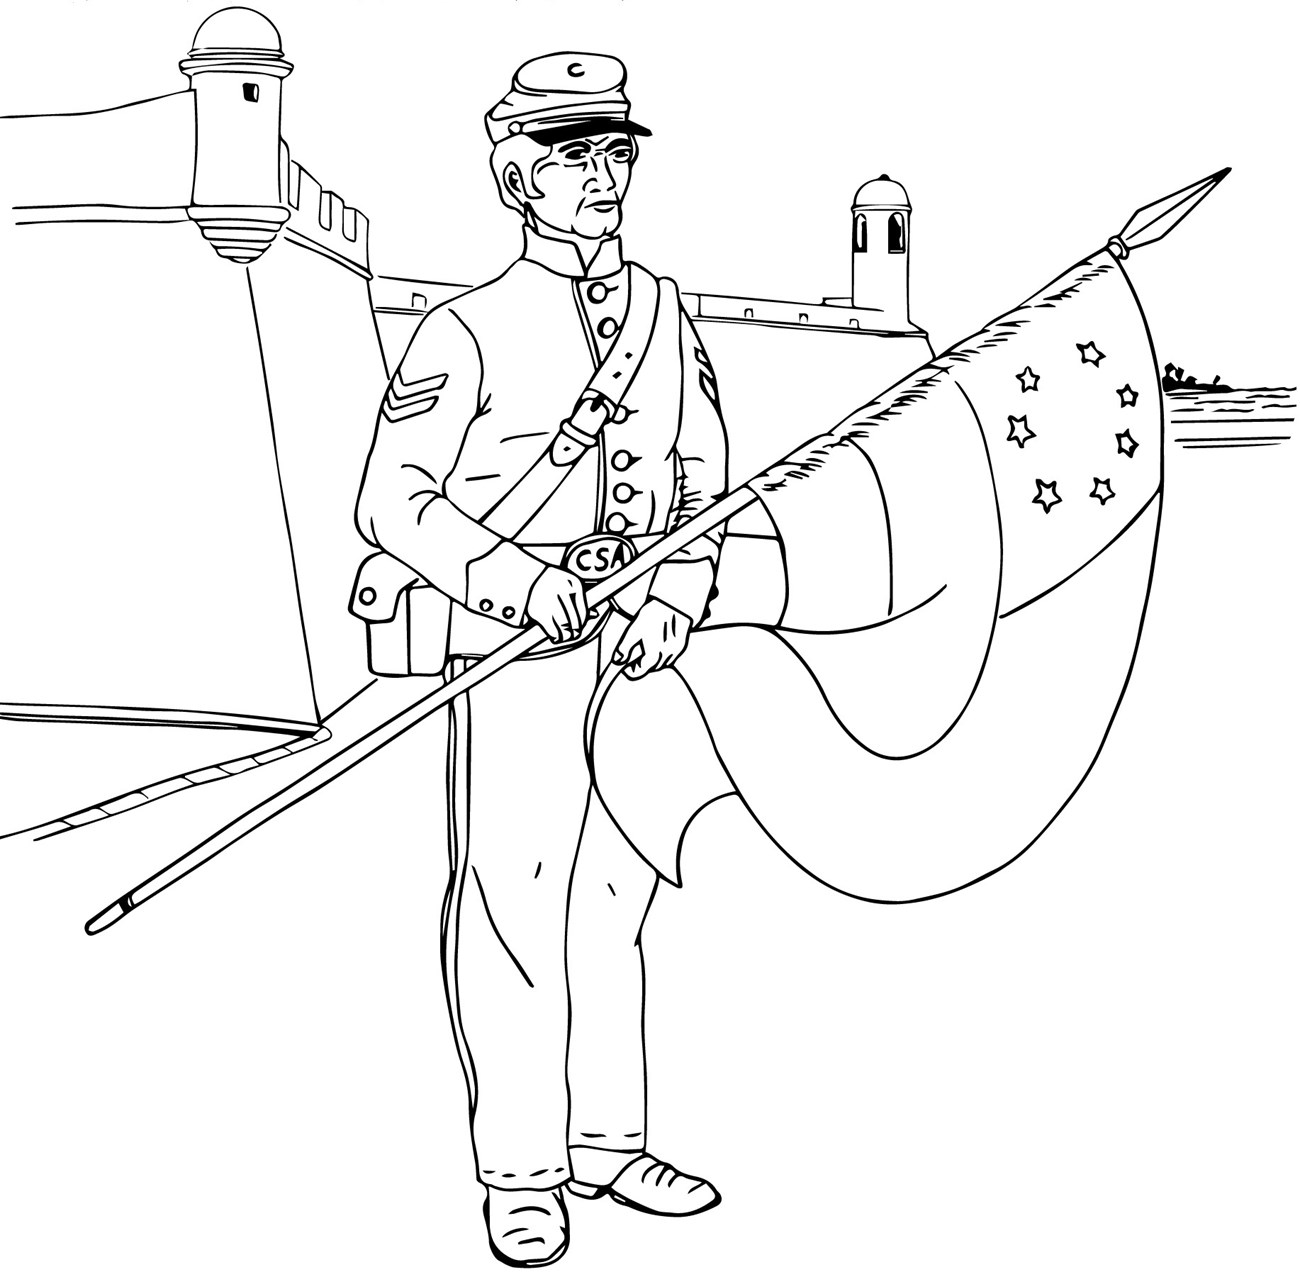 Coloring Page of Confederate Soldier in standing in front of Castillo, called Fort Marion by the U.S.